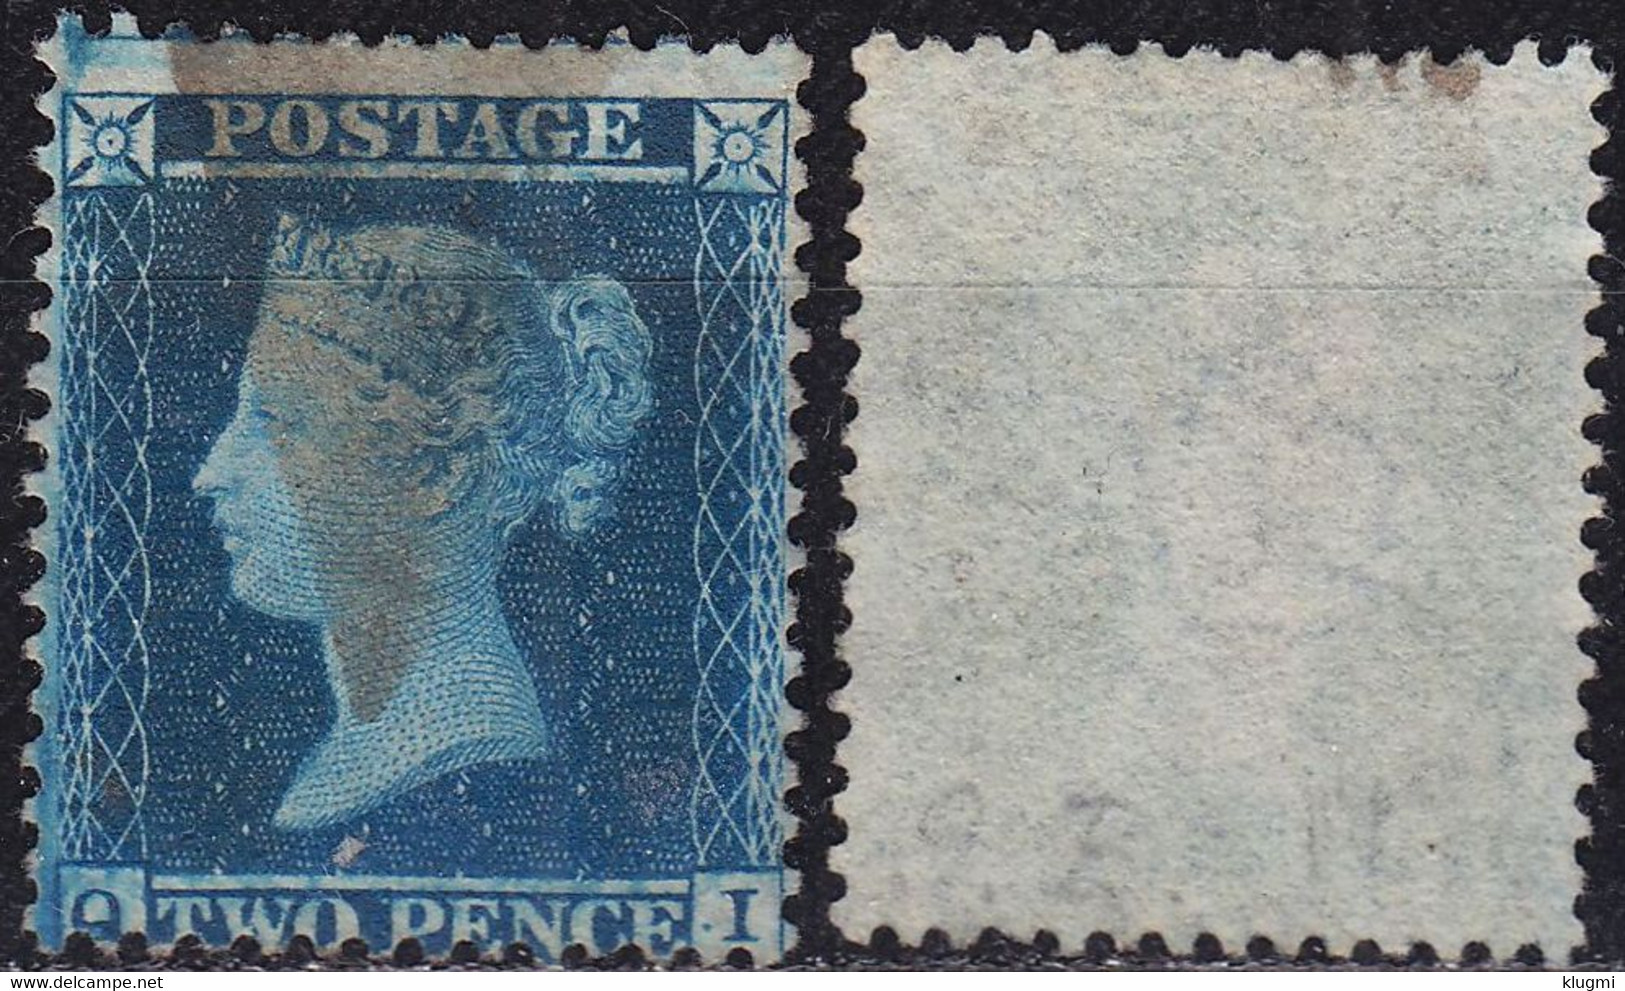 ENGLAND GREAT BRITAIN [1850] MiNr 0009 B ( O/used ) [01] - Used Stamps